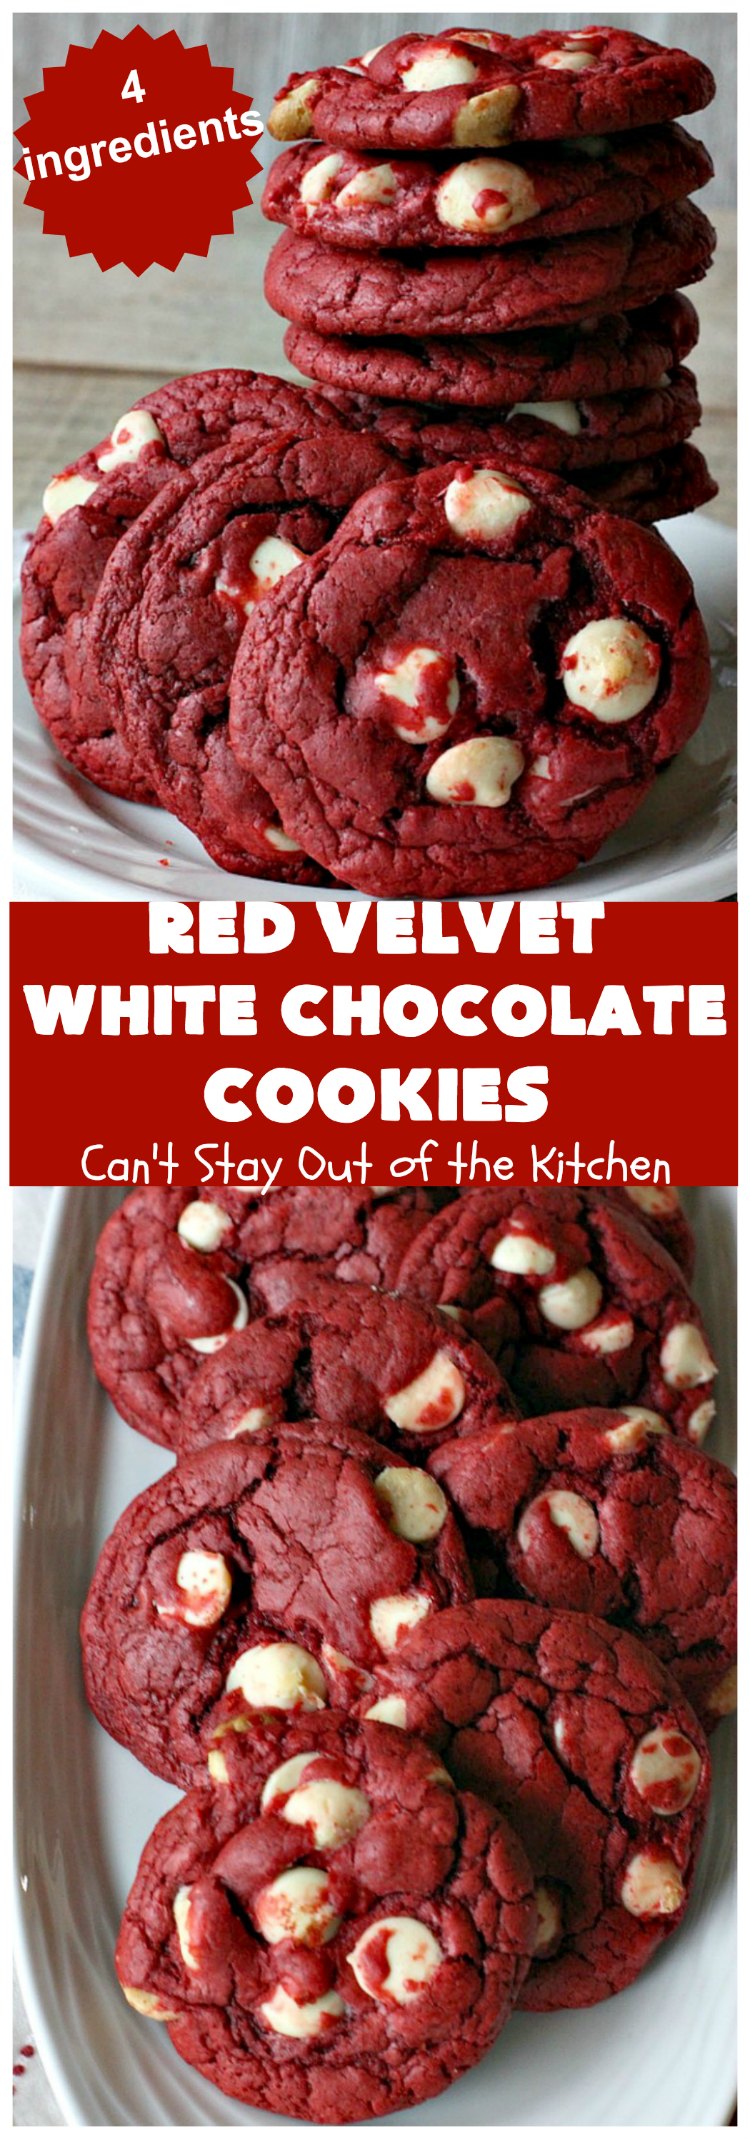 Red Velvet White Chocolate Cookies | Can't Stay Out of the Kitchen